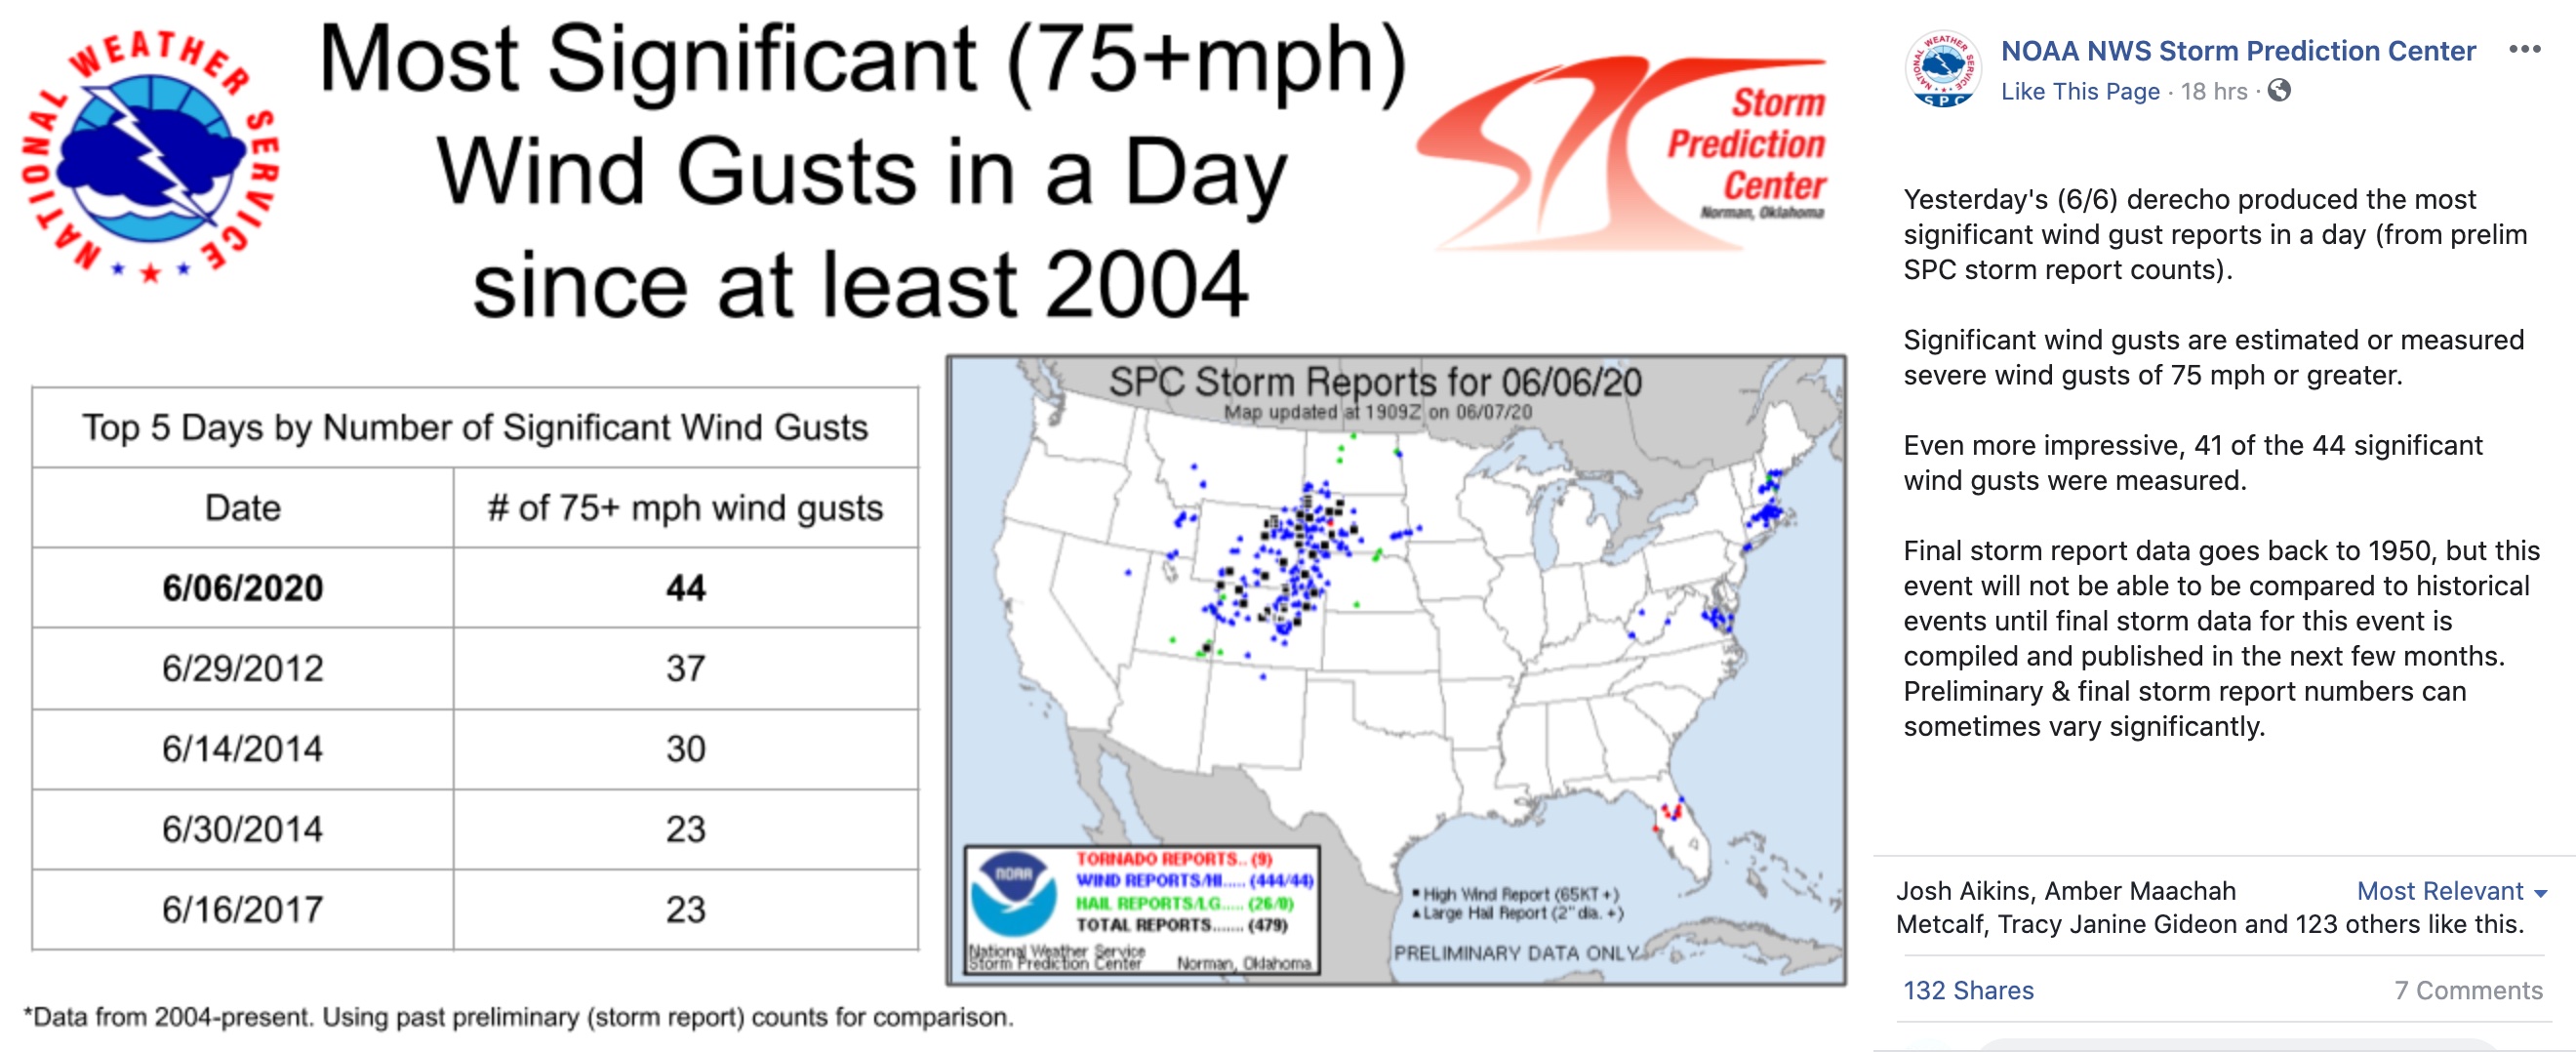 SPC: Most Significant (75+ mph) Wind Gusts in a Day since at least 2004